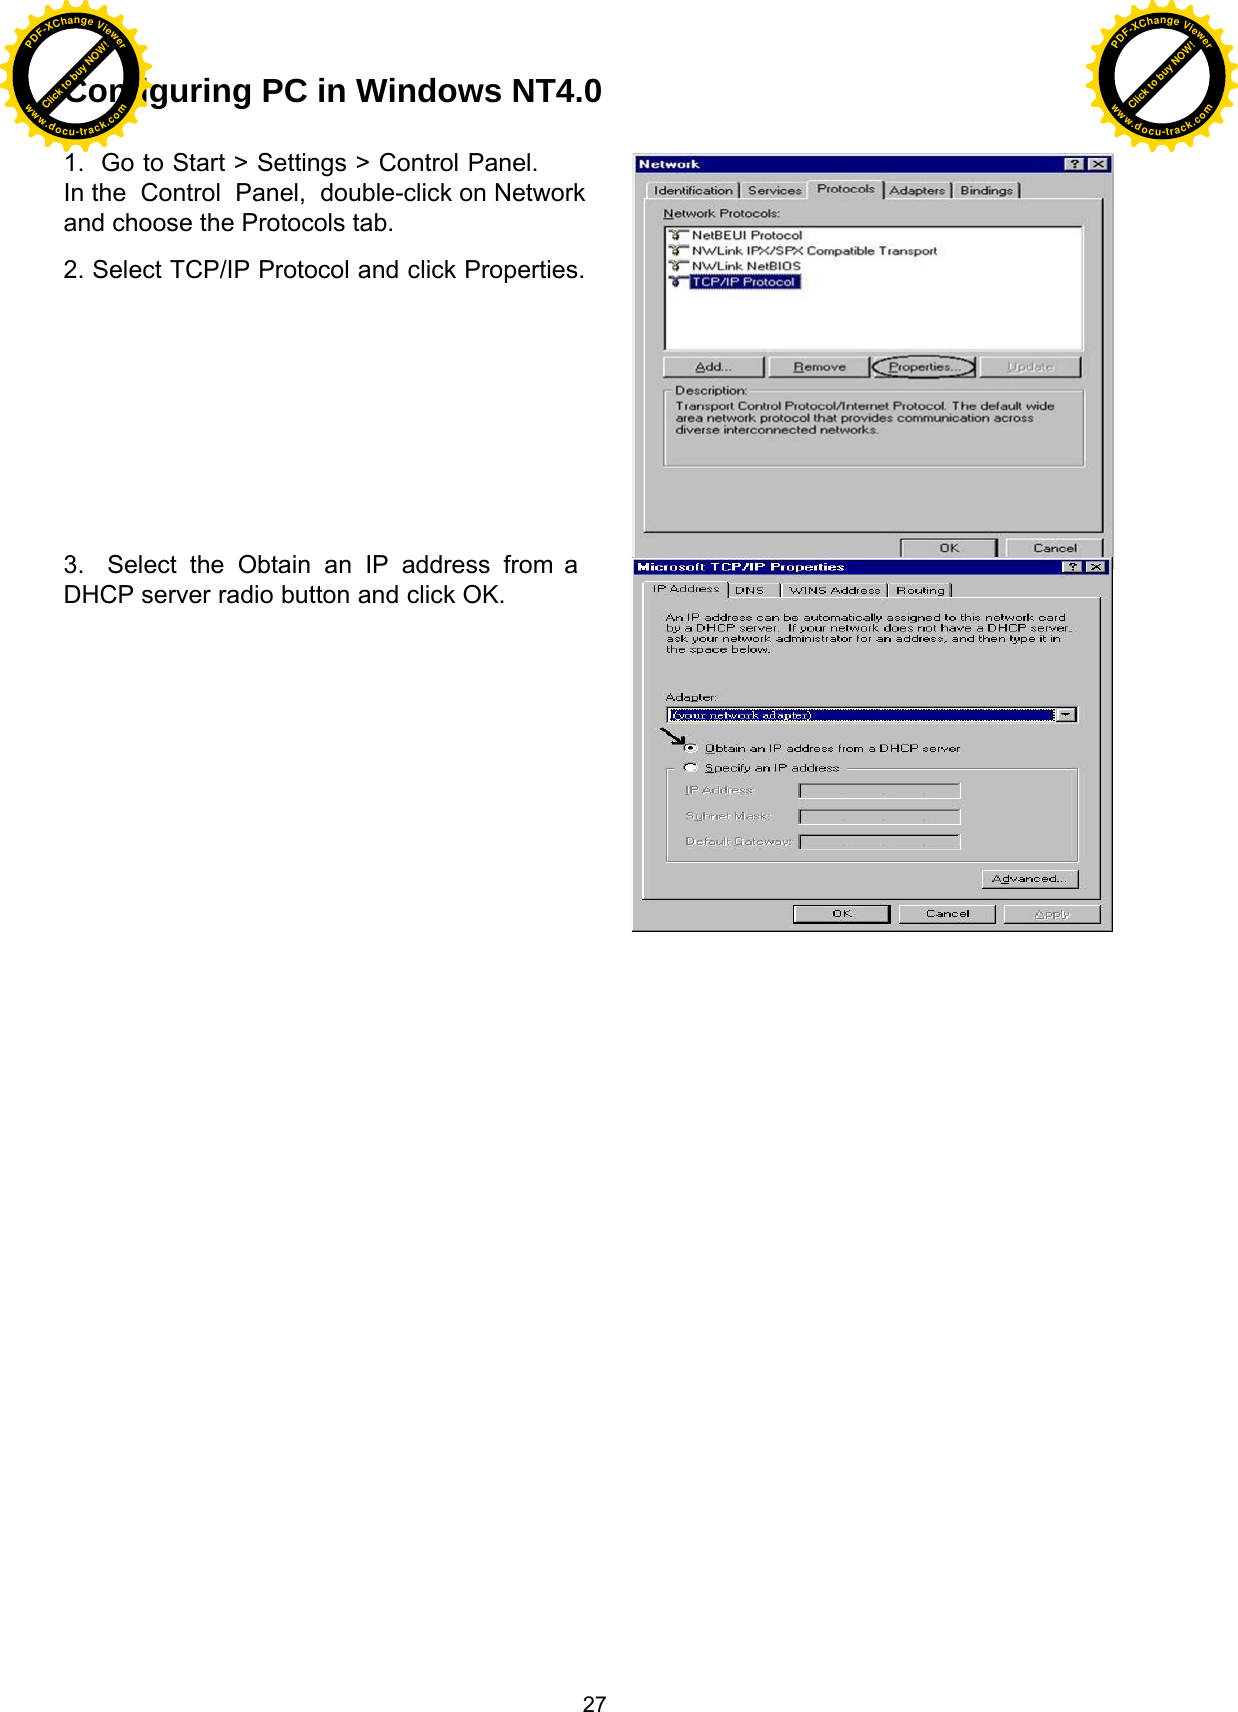  27 Configuring PC in Windows NT4.0   1.  Go to Start &gt; Settings &gt; Control Panel. In the  Control  Panel,  double-click on Network and choose the Protocols tab.  2. Select TCP/IP Protocol and click Properties.              3.  Select the Obtain an IP address from a DHCP server radio button and click OK. Click to buy NOW!PDF-XChange Viewerwww.docu-track.comClick to buy NOW!PDF-XChange Viewerwww.docu-track.com